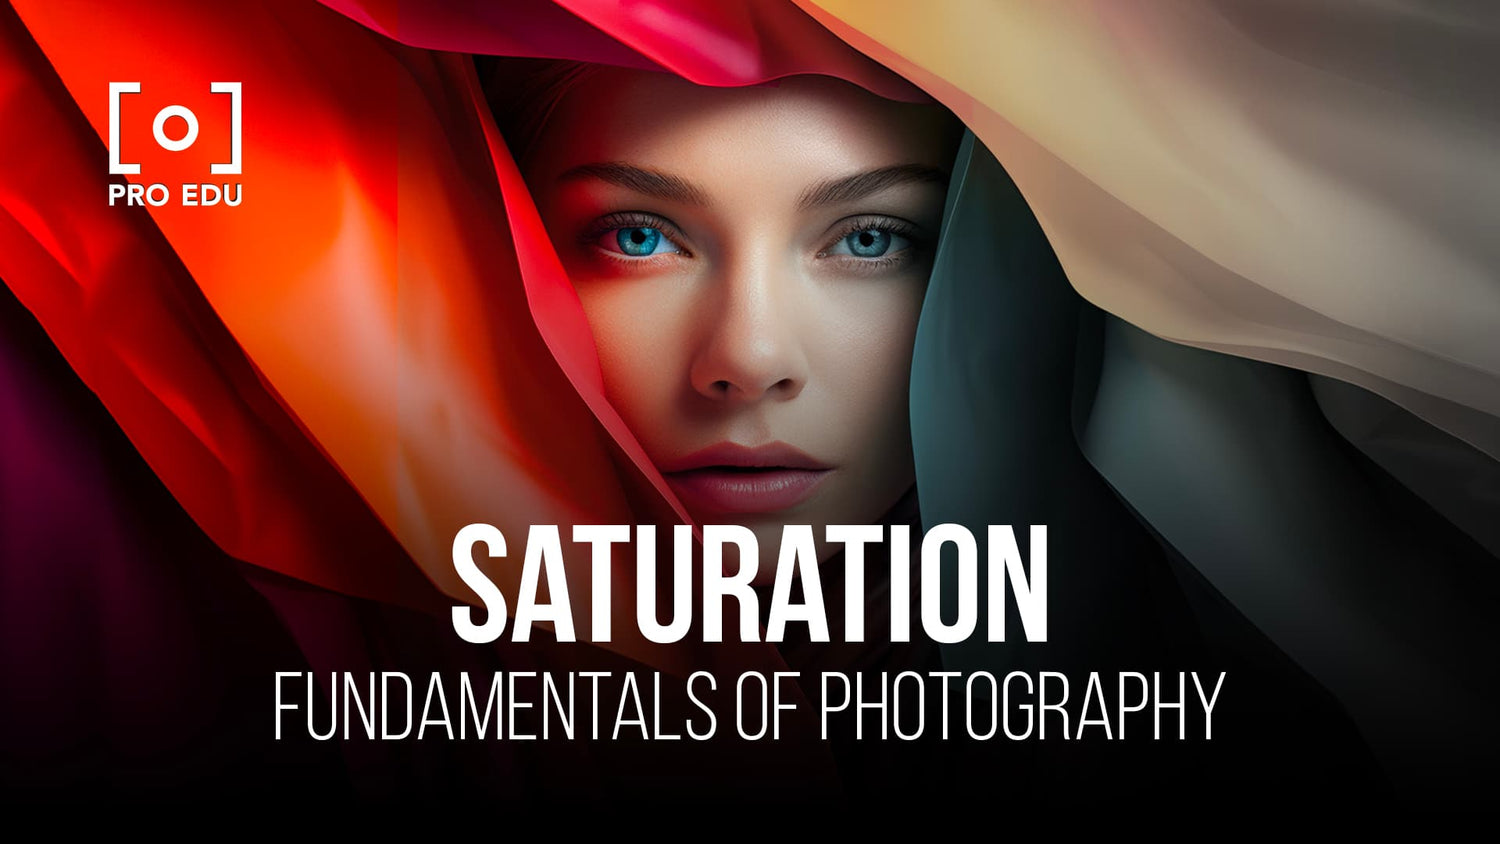 Bringing colors to life with saturation techniques in photography